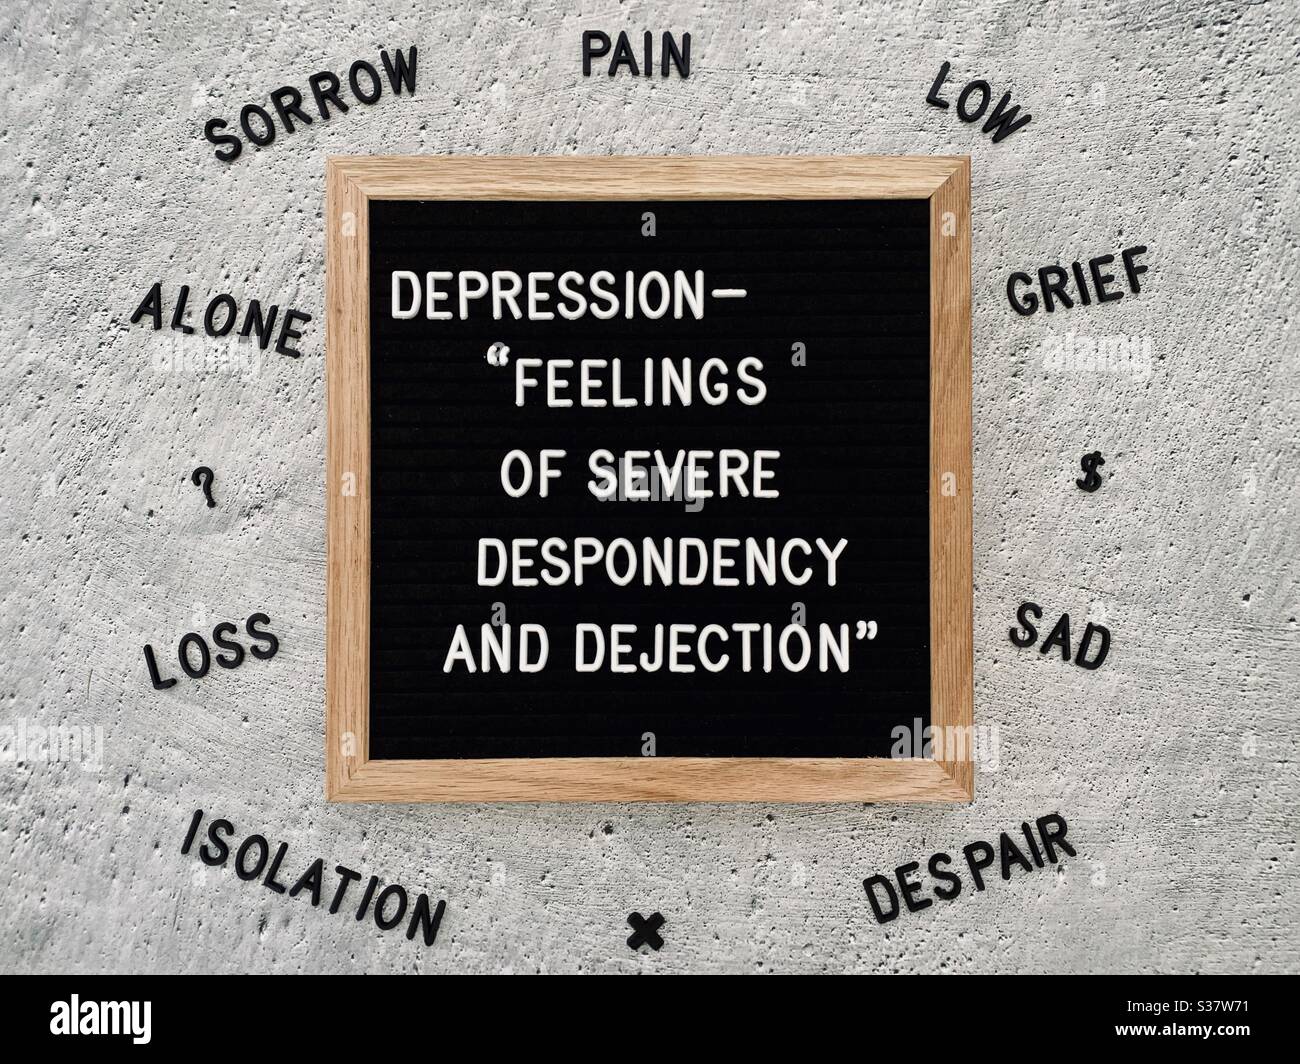 Depression quote against a rough textured concrete background. Dictionary quotation. Words explaining depression. Major depression disorder. Mental Health Awareness. Stock Photo